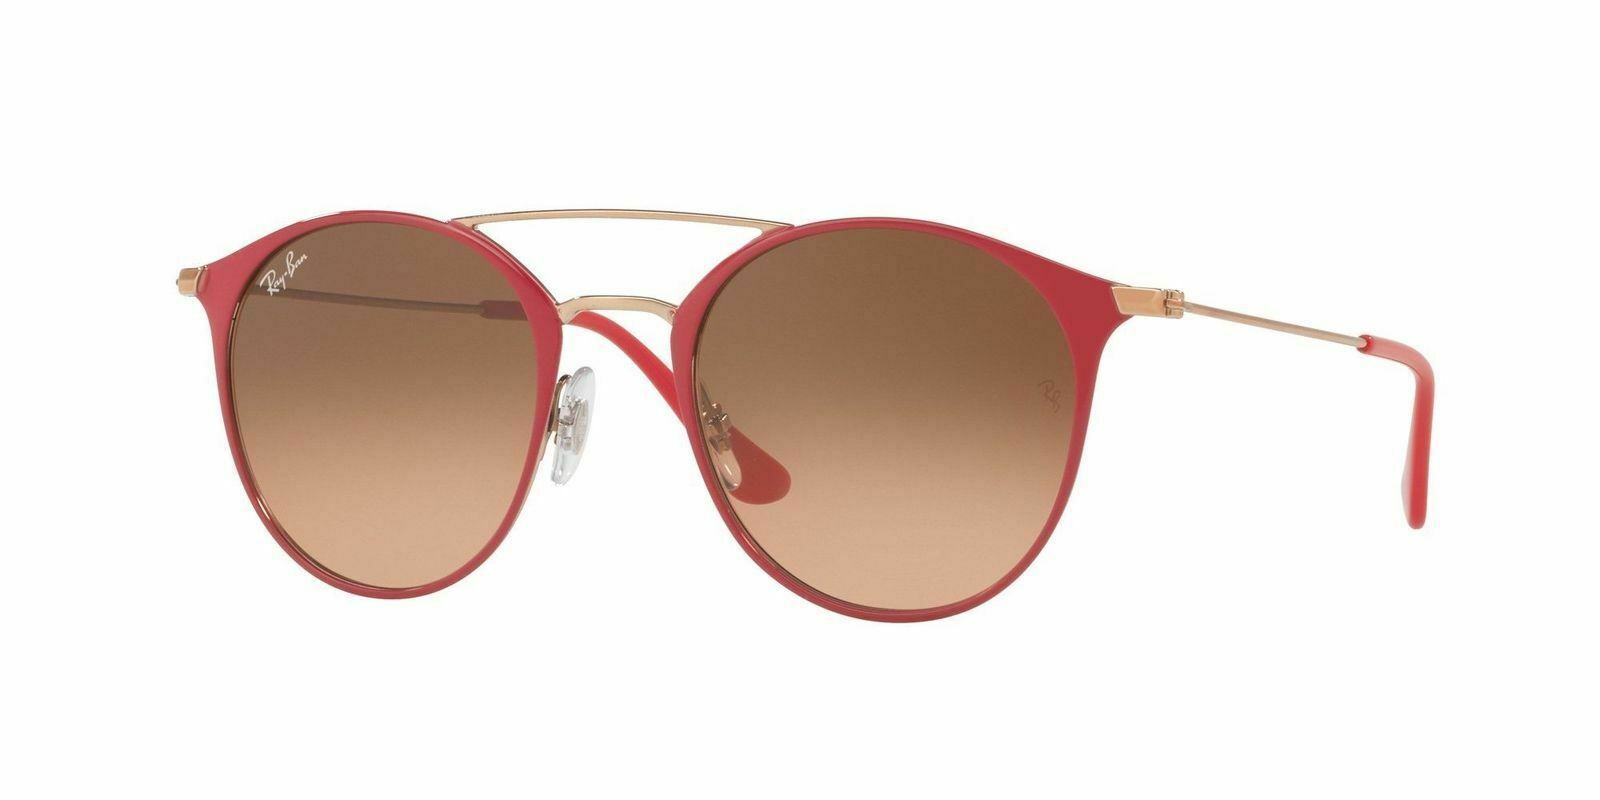 Kính mắt Ray Ban Sunglasses RB3546 907271 52MM Red Bronze Pink Brown Gradient Round